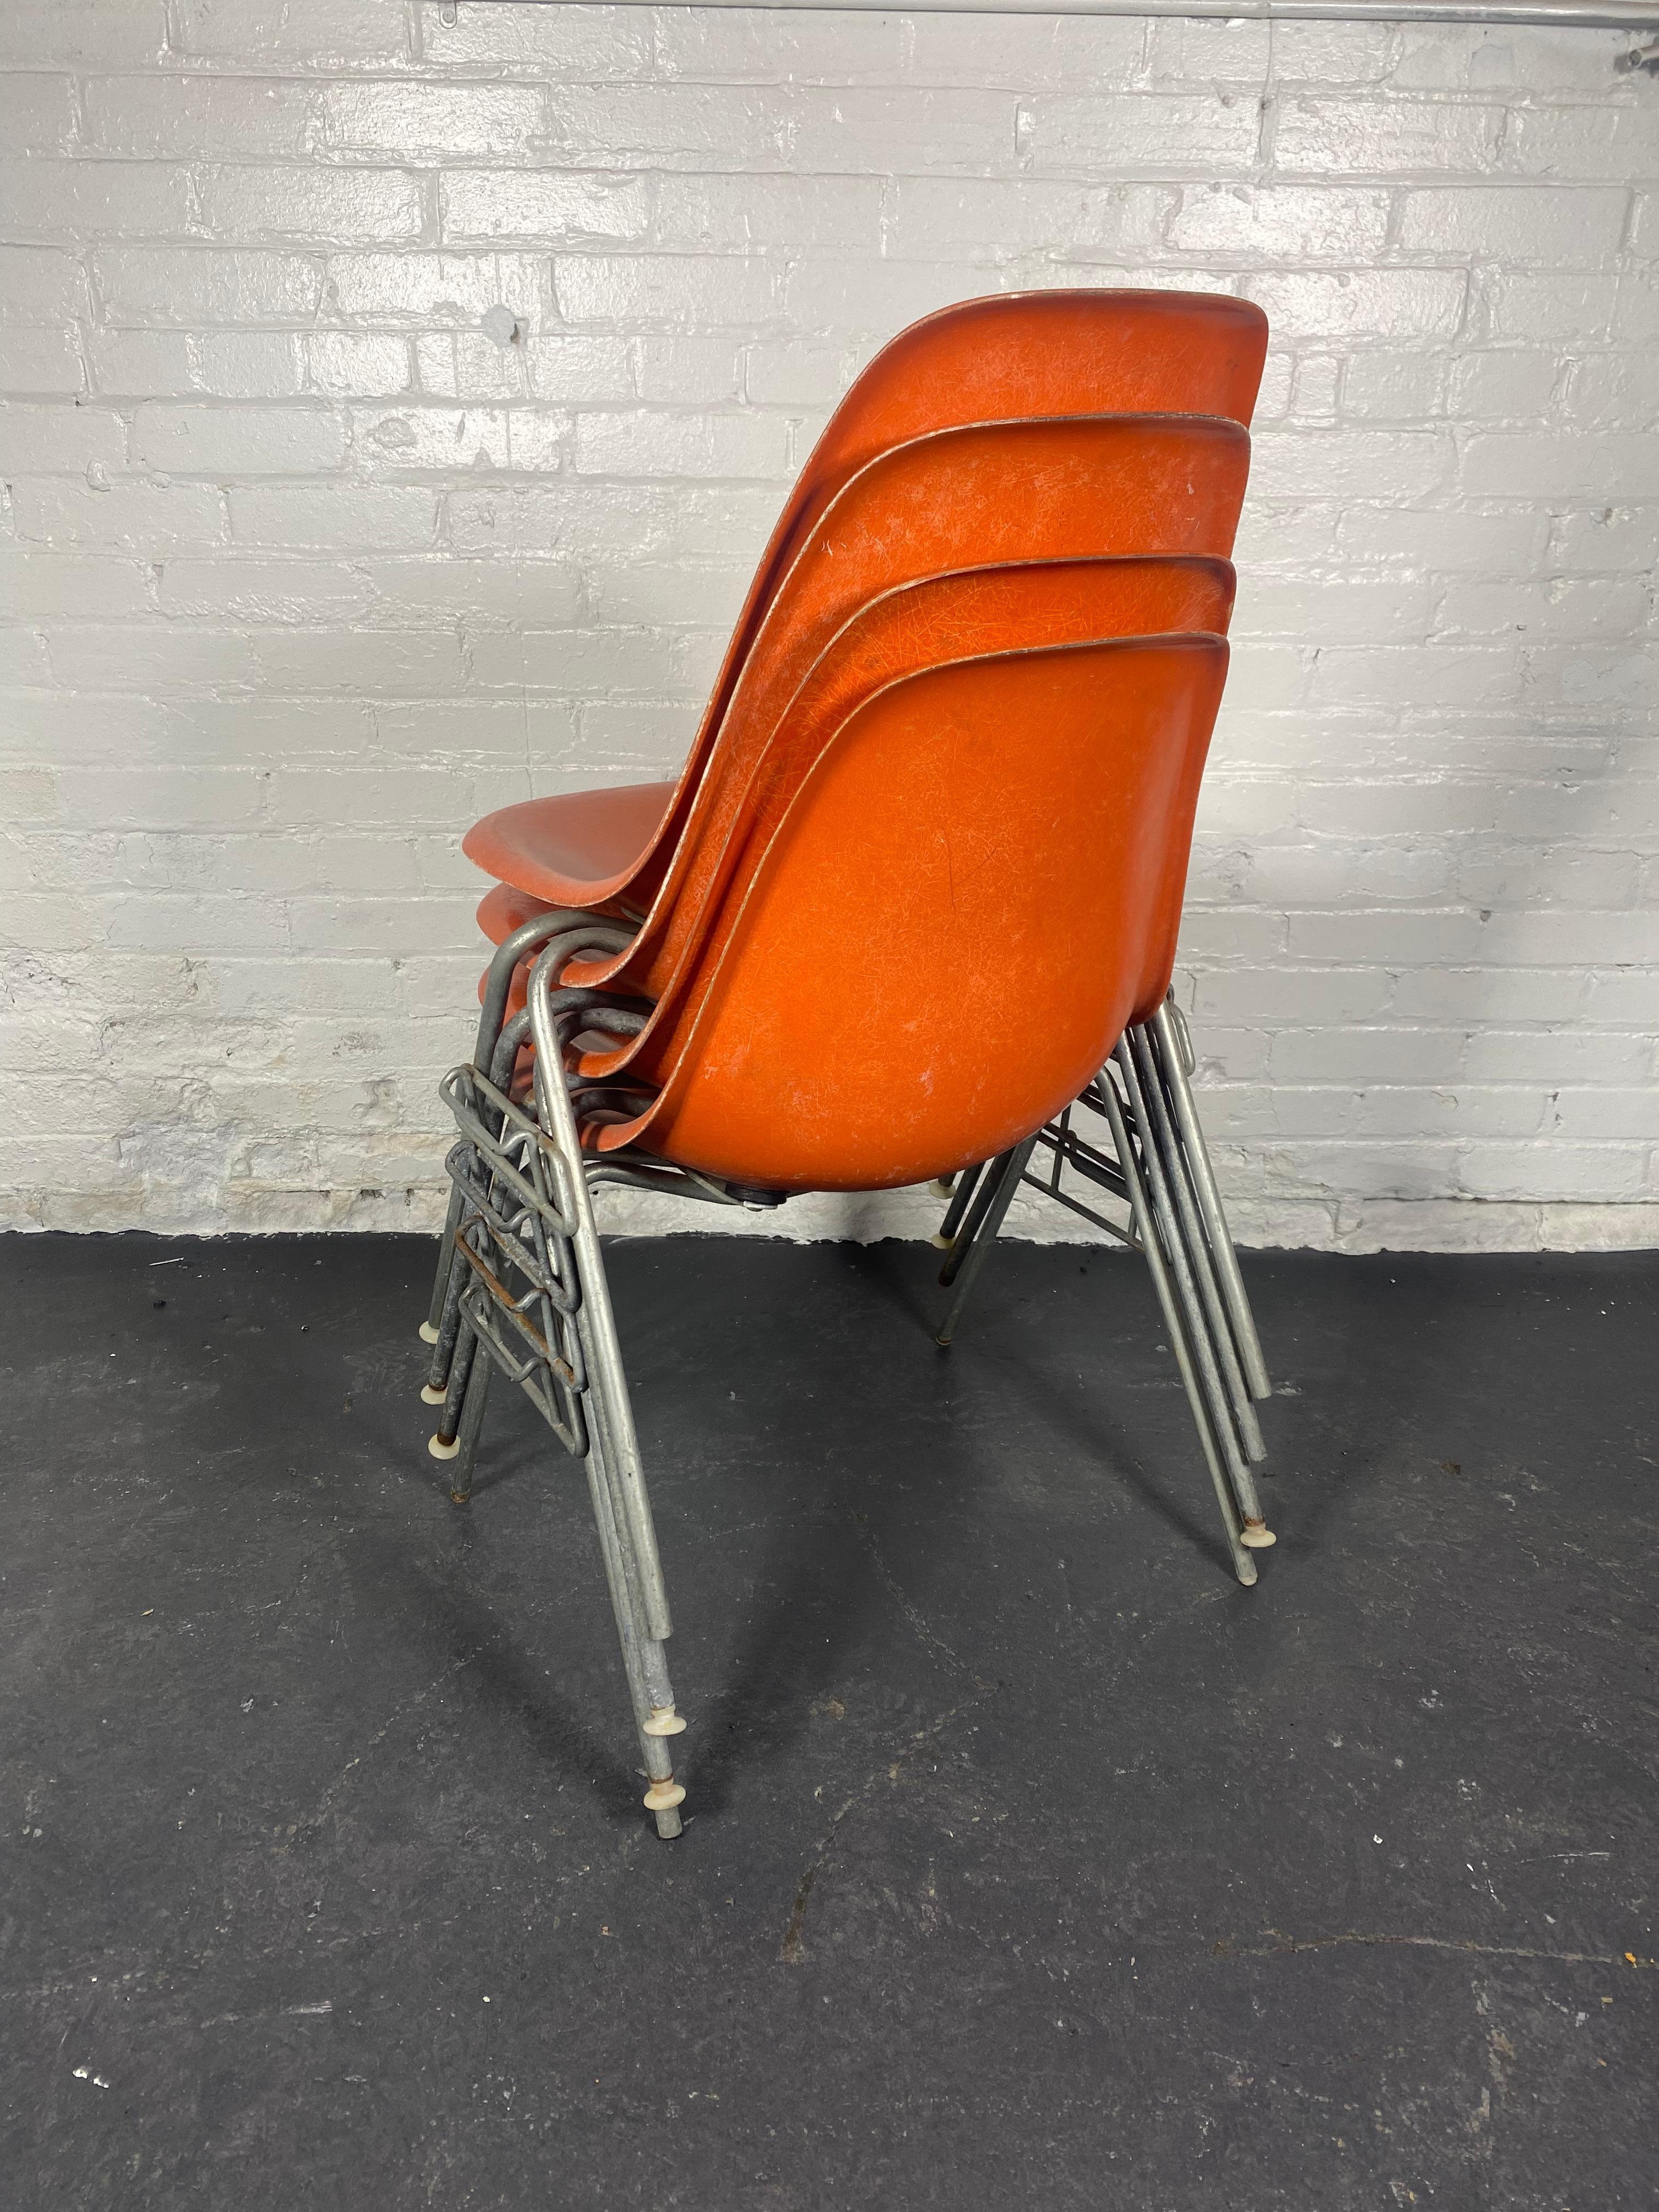 American SET 4 DSS Stacking Chairs, Charles & Ray Eames, Herman Miller, Orange Fiberglass For Sale